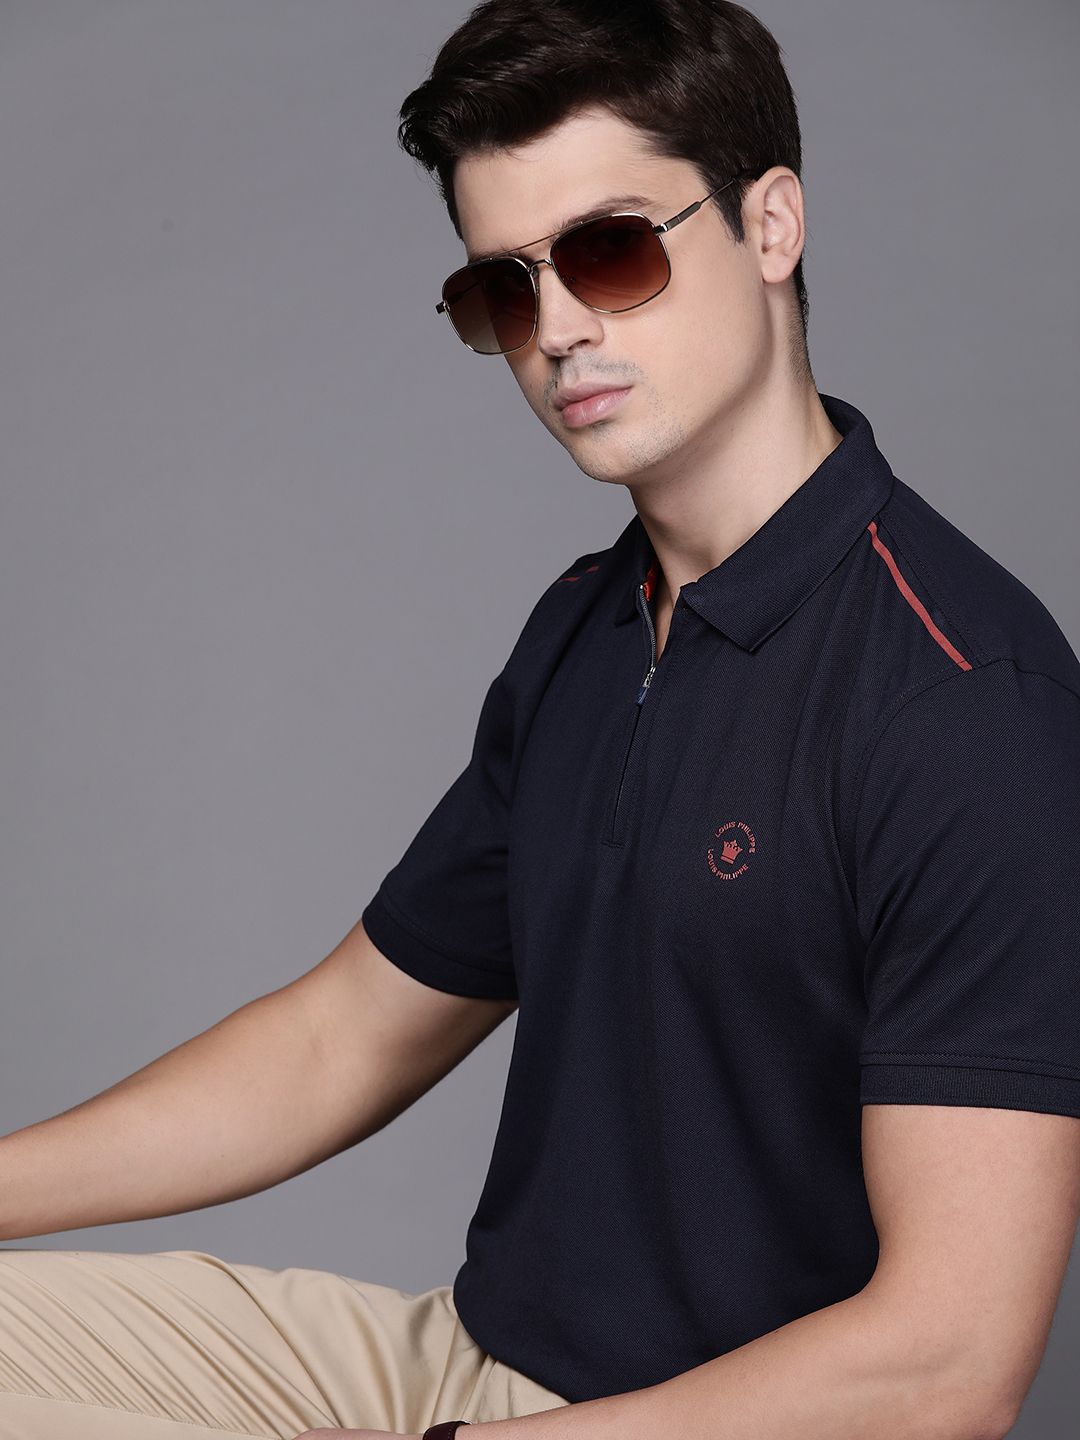 louis philippe mens solid polo t shirt